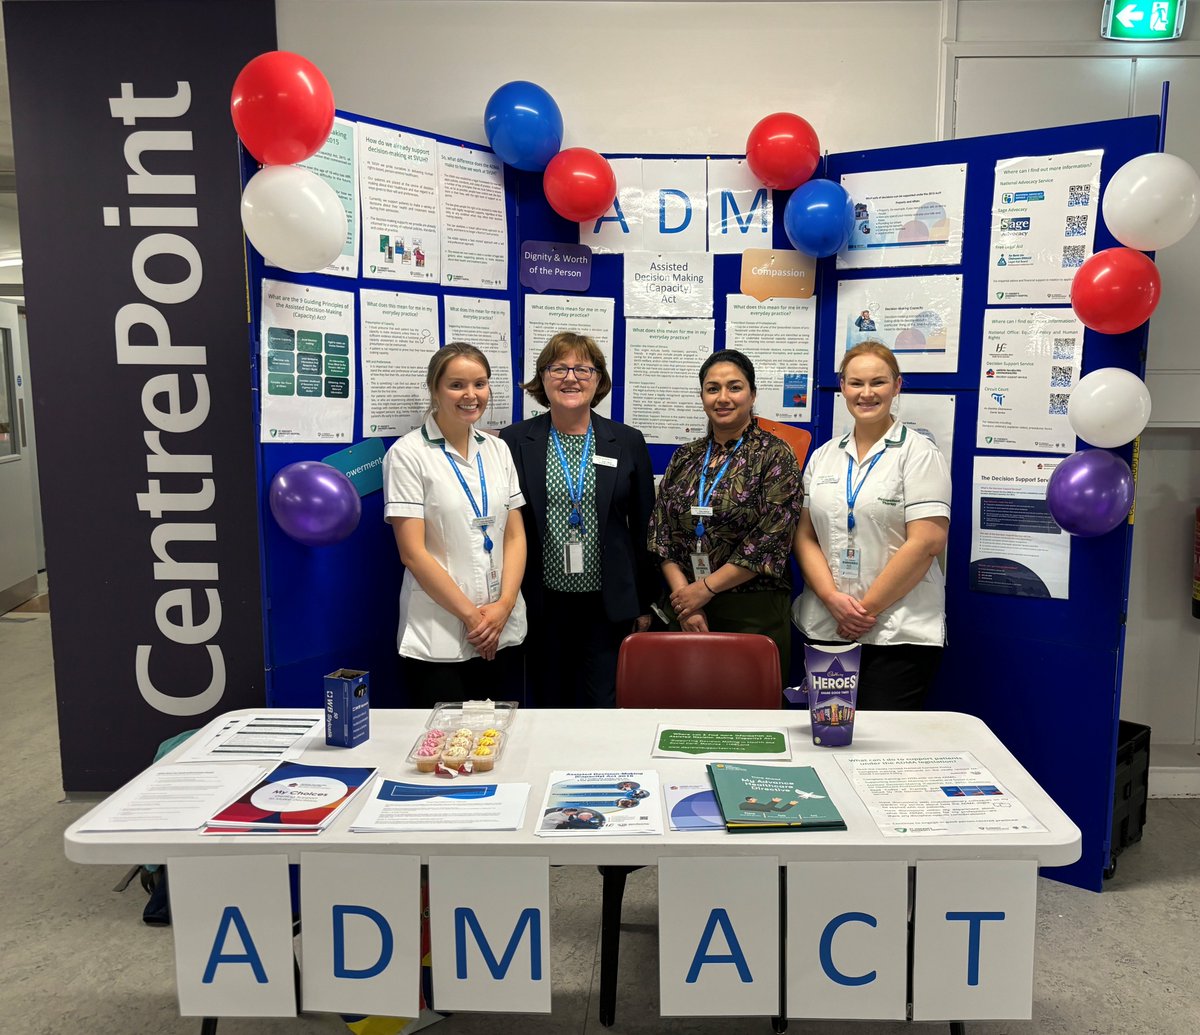 Celebrating 1 year of the Assisted Decision-Making (Capacity) Act, 2015 (as amended) at SVUH. Empowering patients to make informed decisions about their health & well-being. Together, we're championing autonomy and dignity for all. #ADMAAnniversary #PatientEmpowerment #SVUH